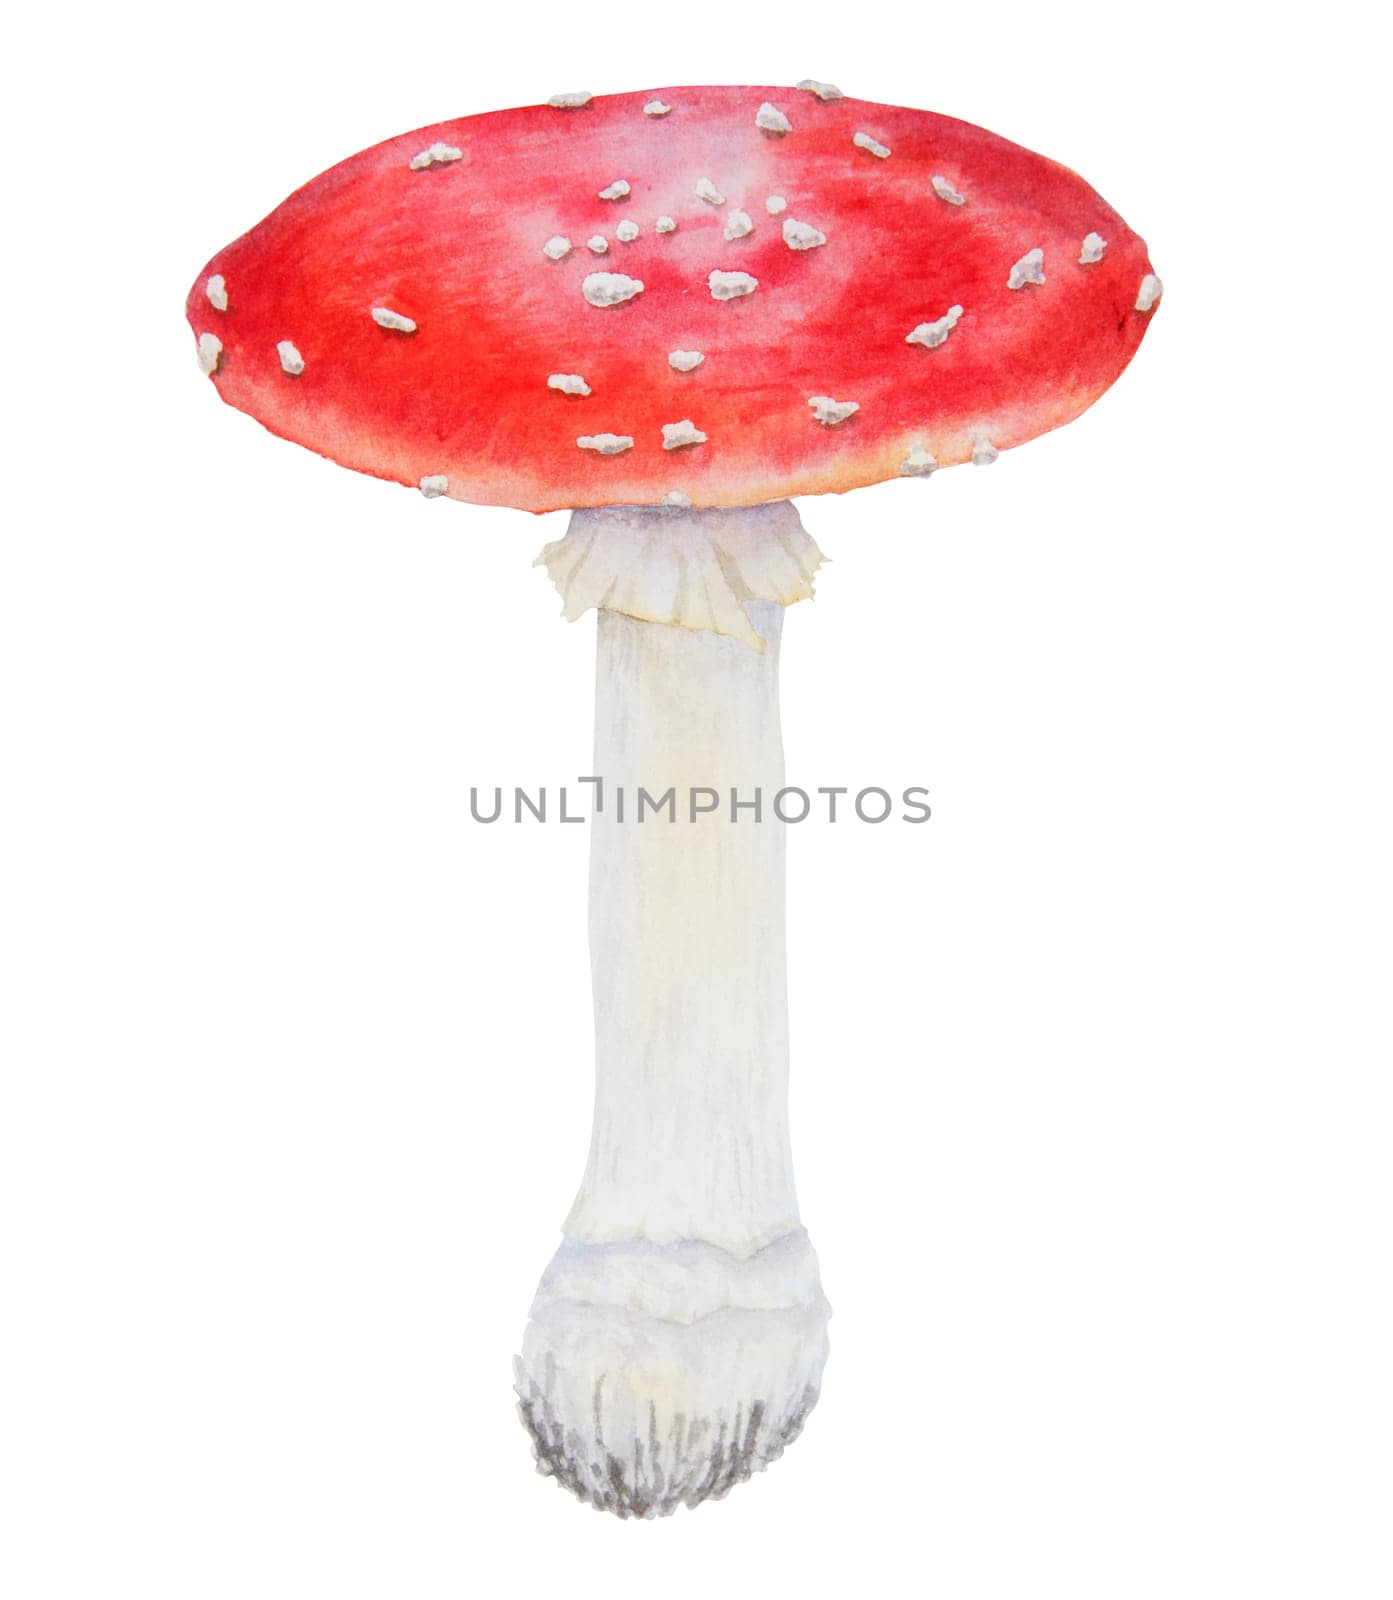 Red fly agaric. Watercolor hand drawn illustration. Realistic botanical Amanita muscaria mushroom clip art for eco goods, textiles, natural herbal medicine, healthy tea, cosmetics, homeopatic remedies.